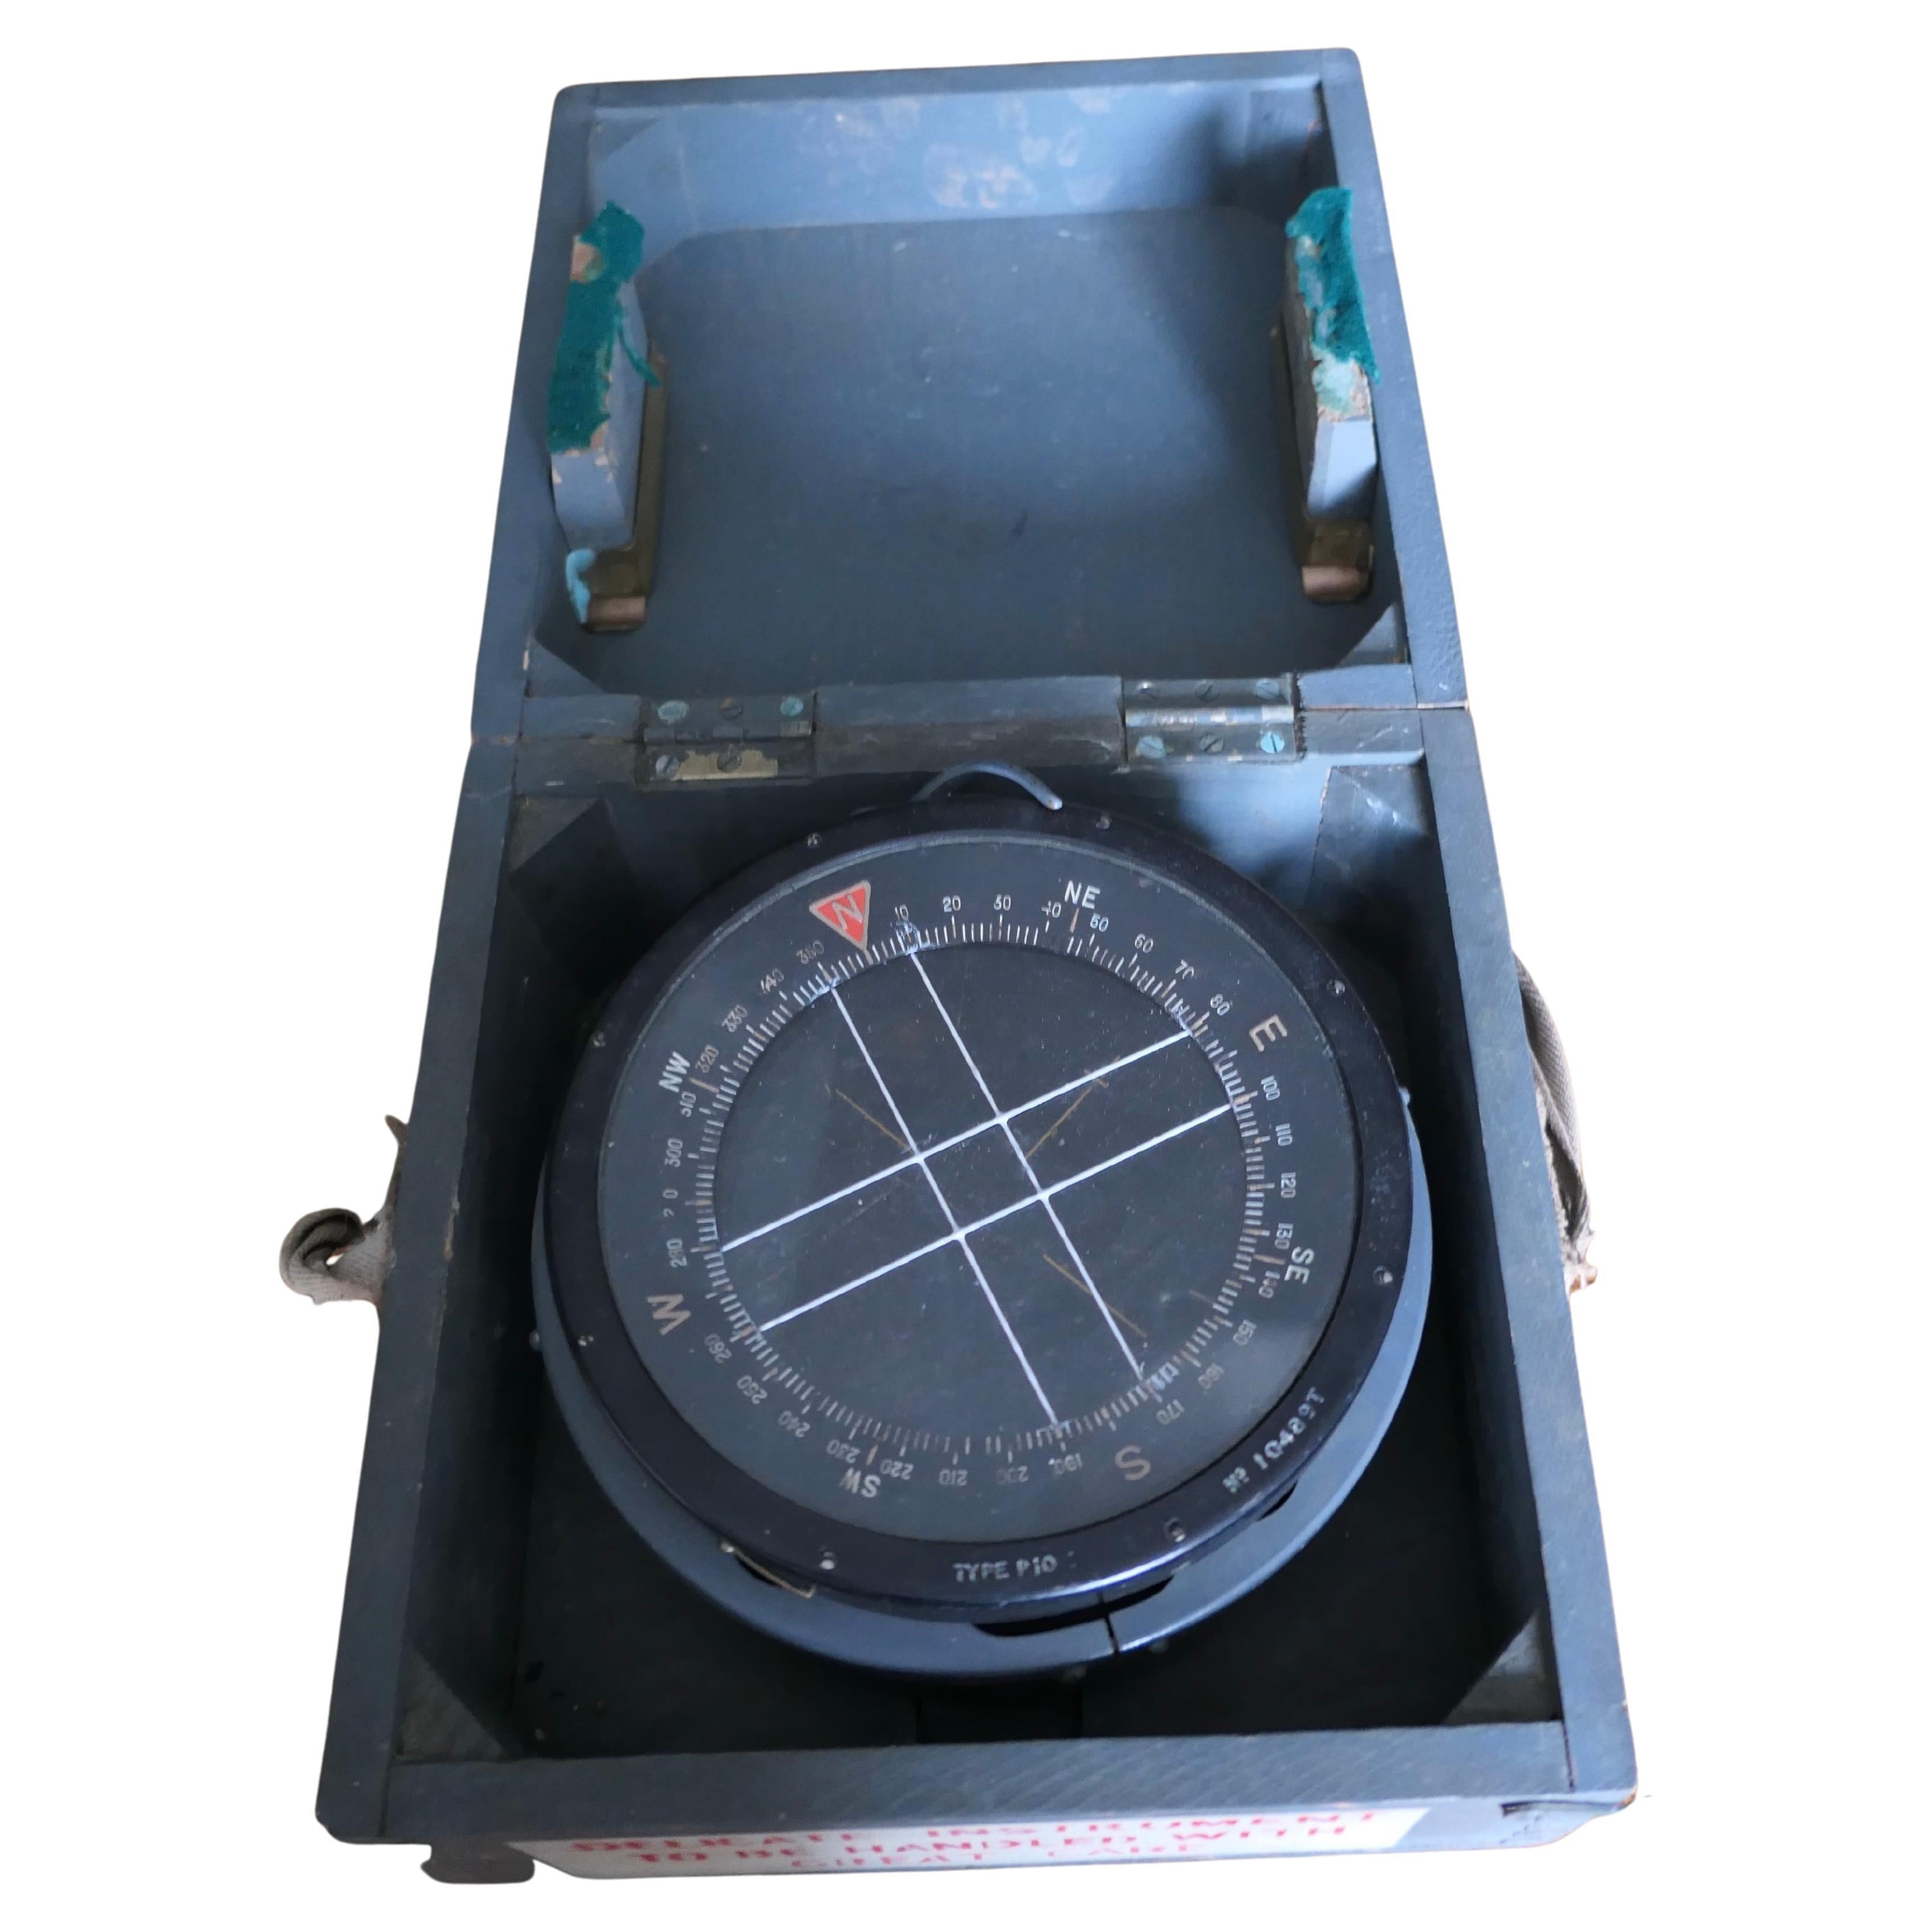 Royal Air Force P10 Aircraft Compass No. 10489 T For Sale